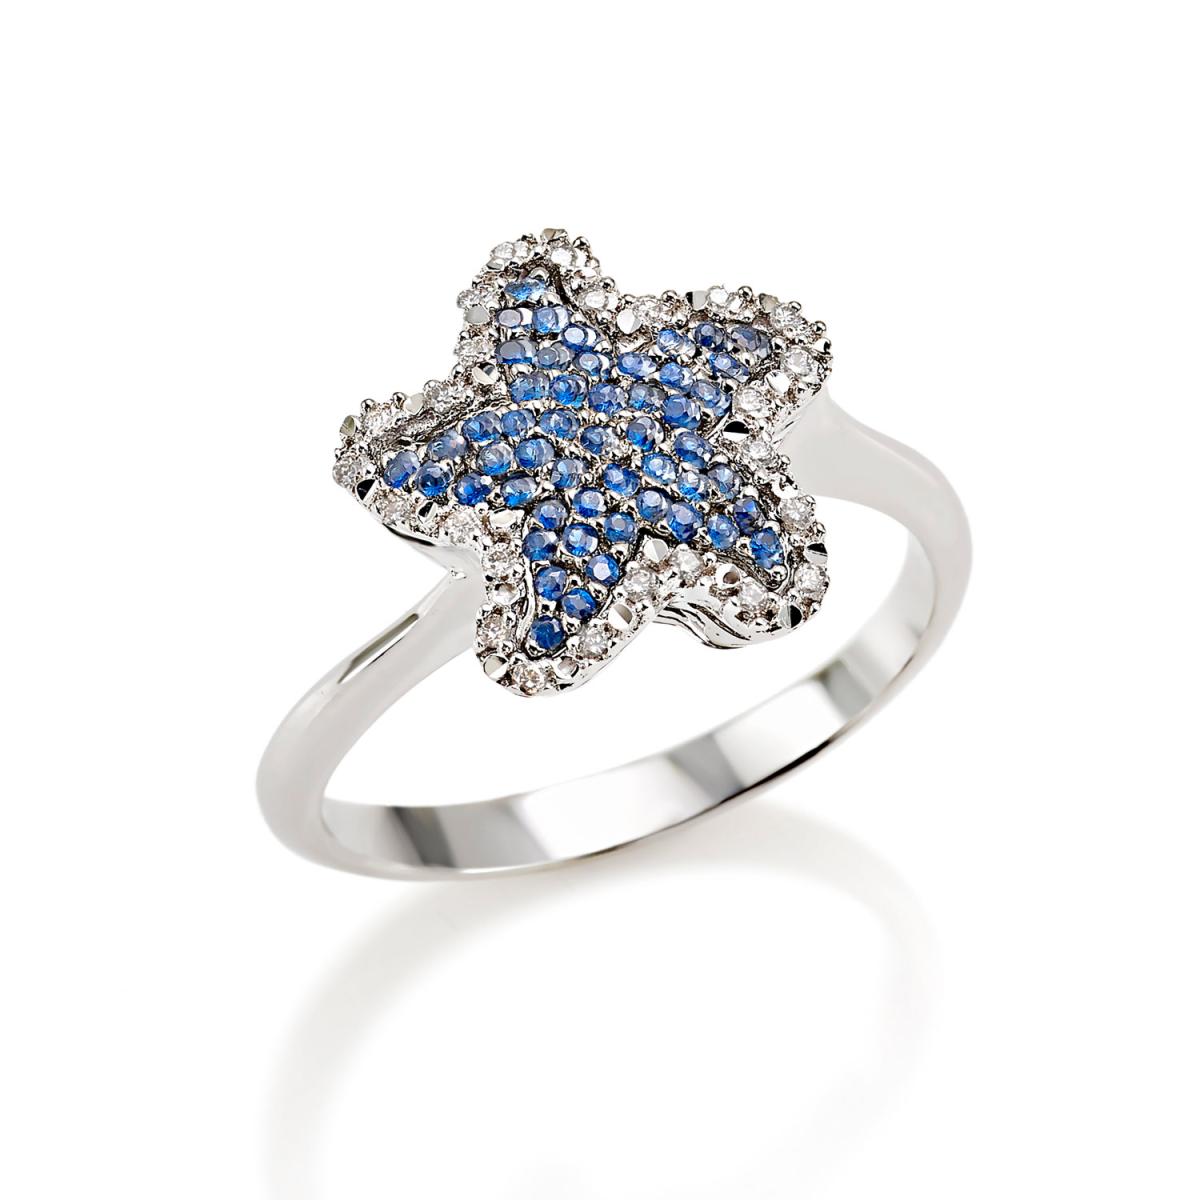 Stella ring in 18kt white gold with pavé diamonds and precious stones - AD607